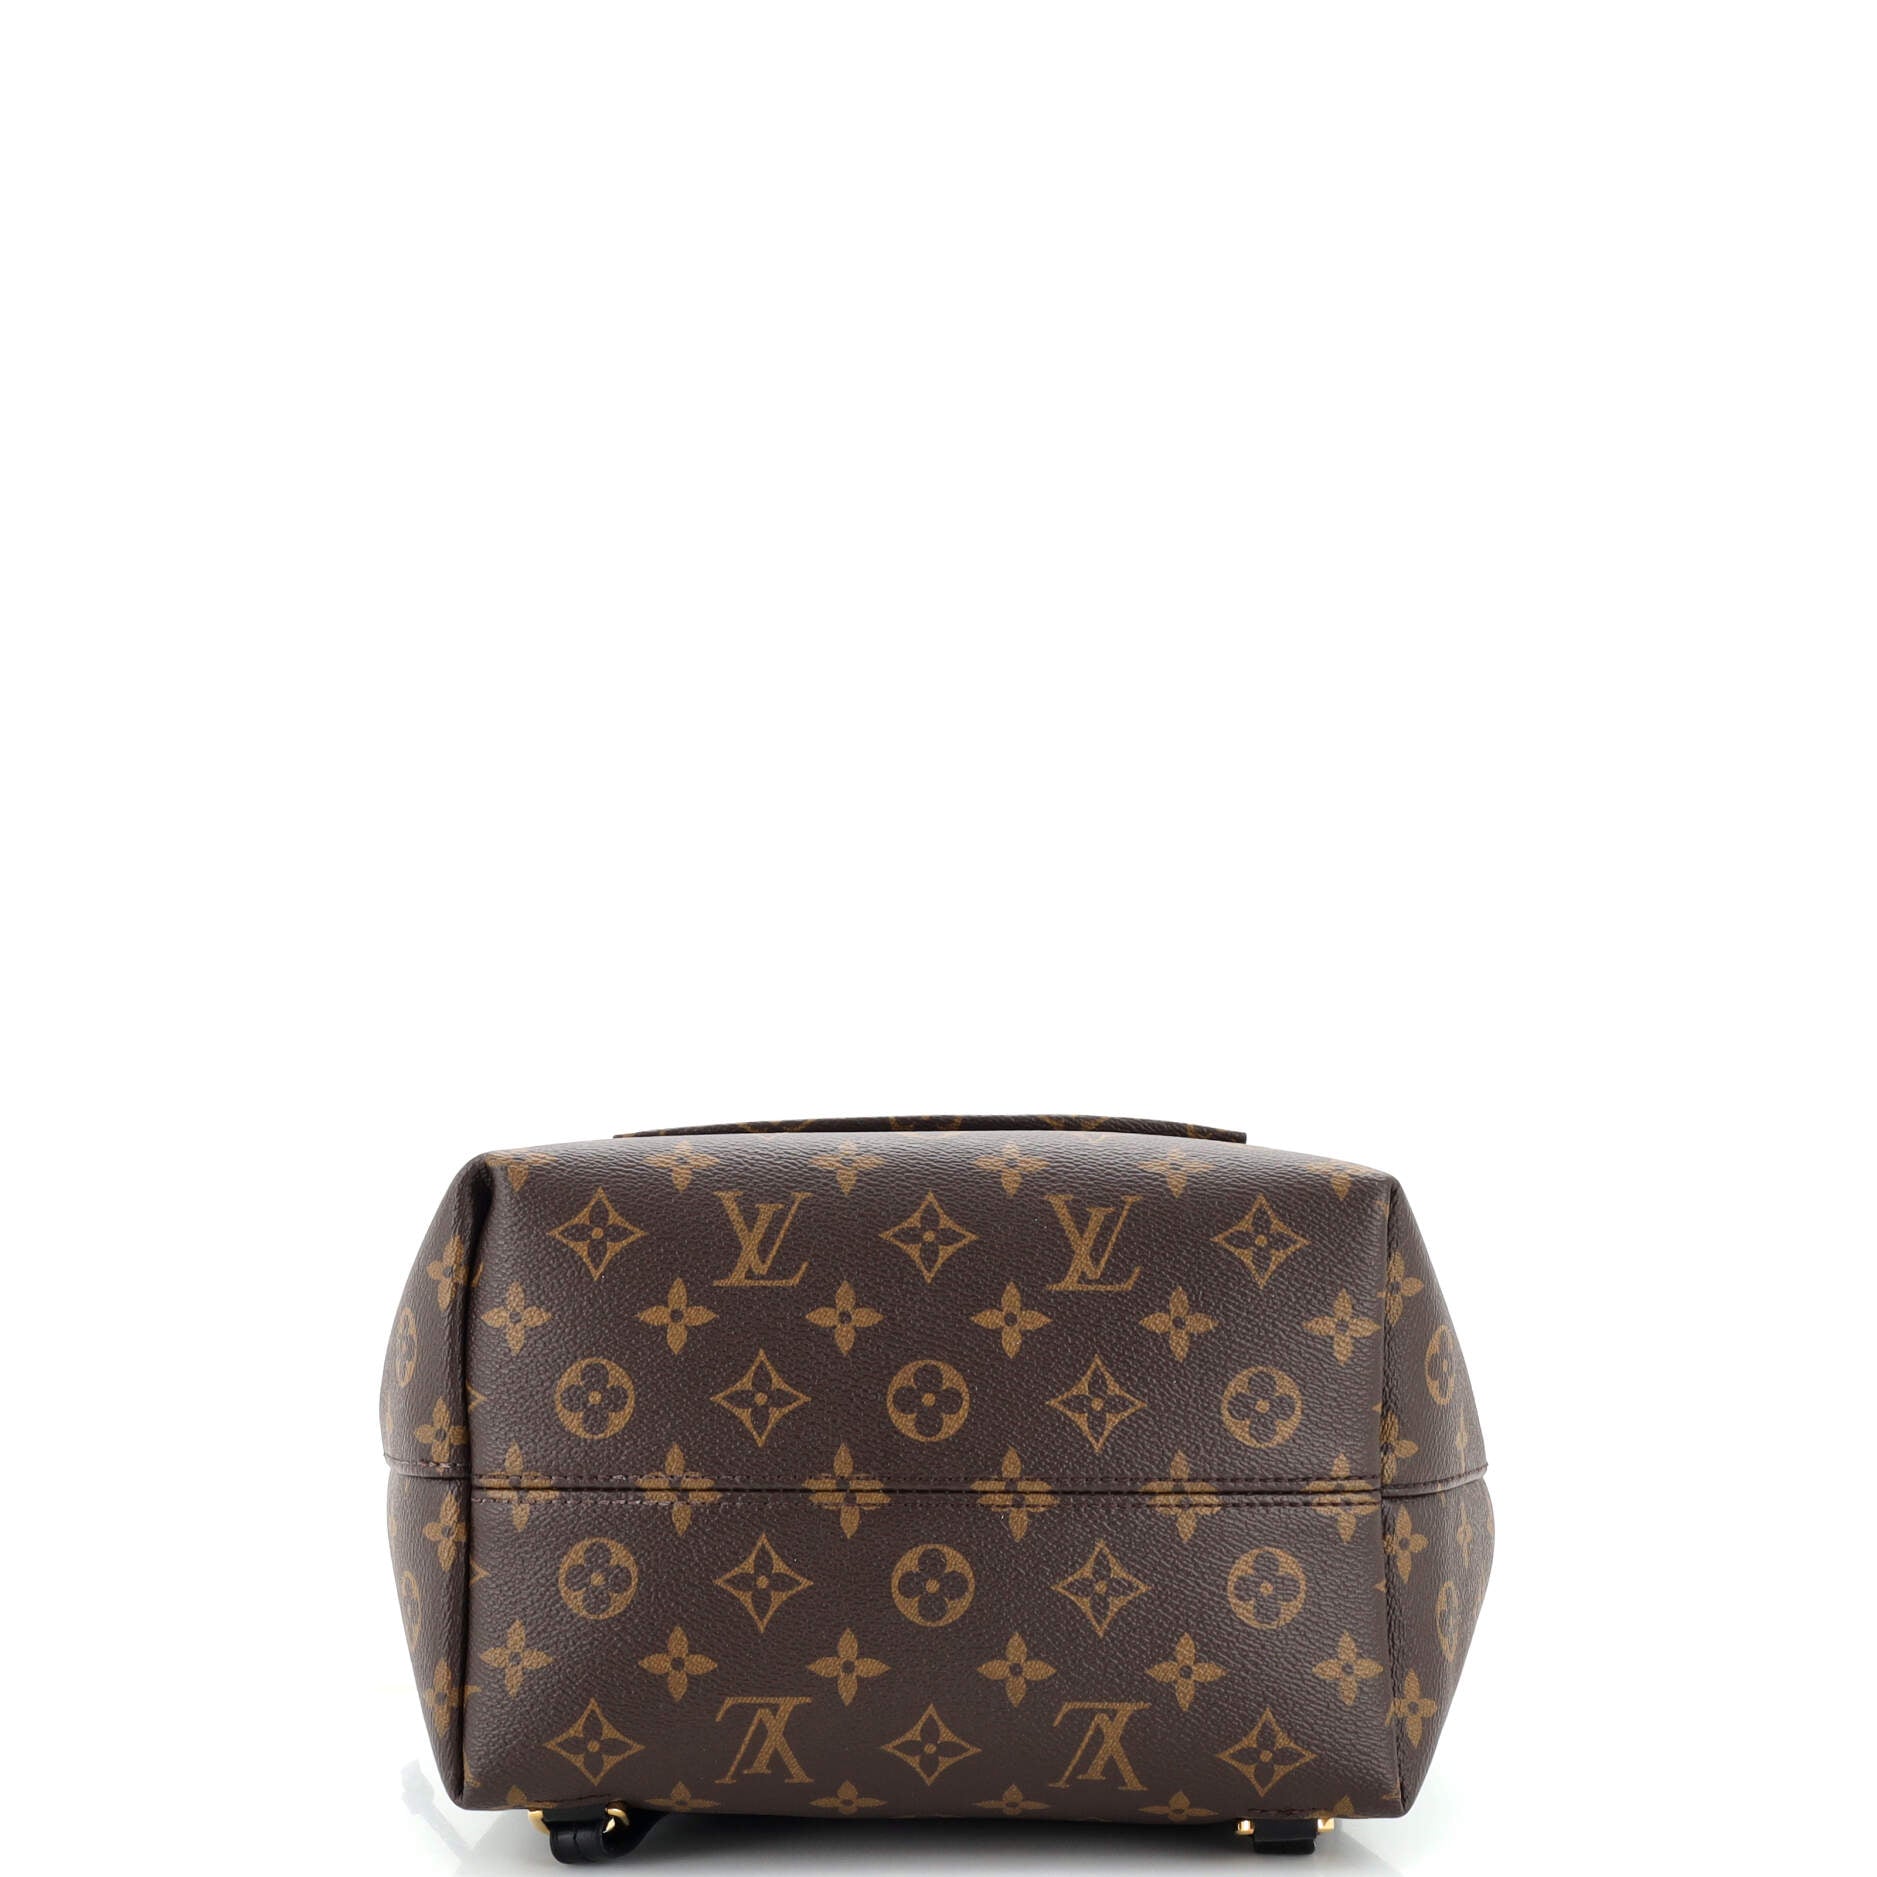 Louis Vuitton 2012 pre-owned Sac A Dos Bosphore Backpack - Farfetch